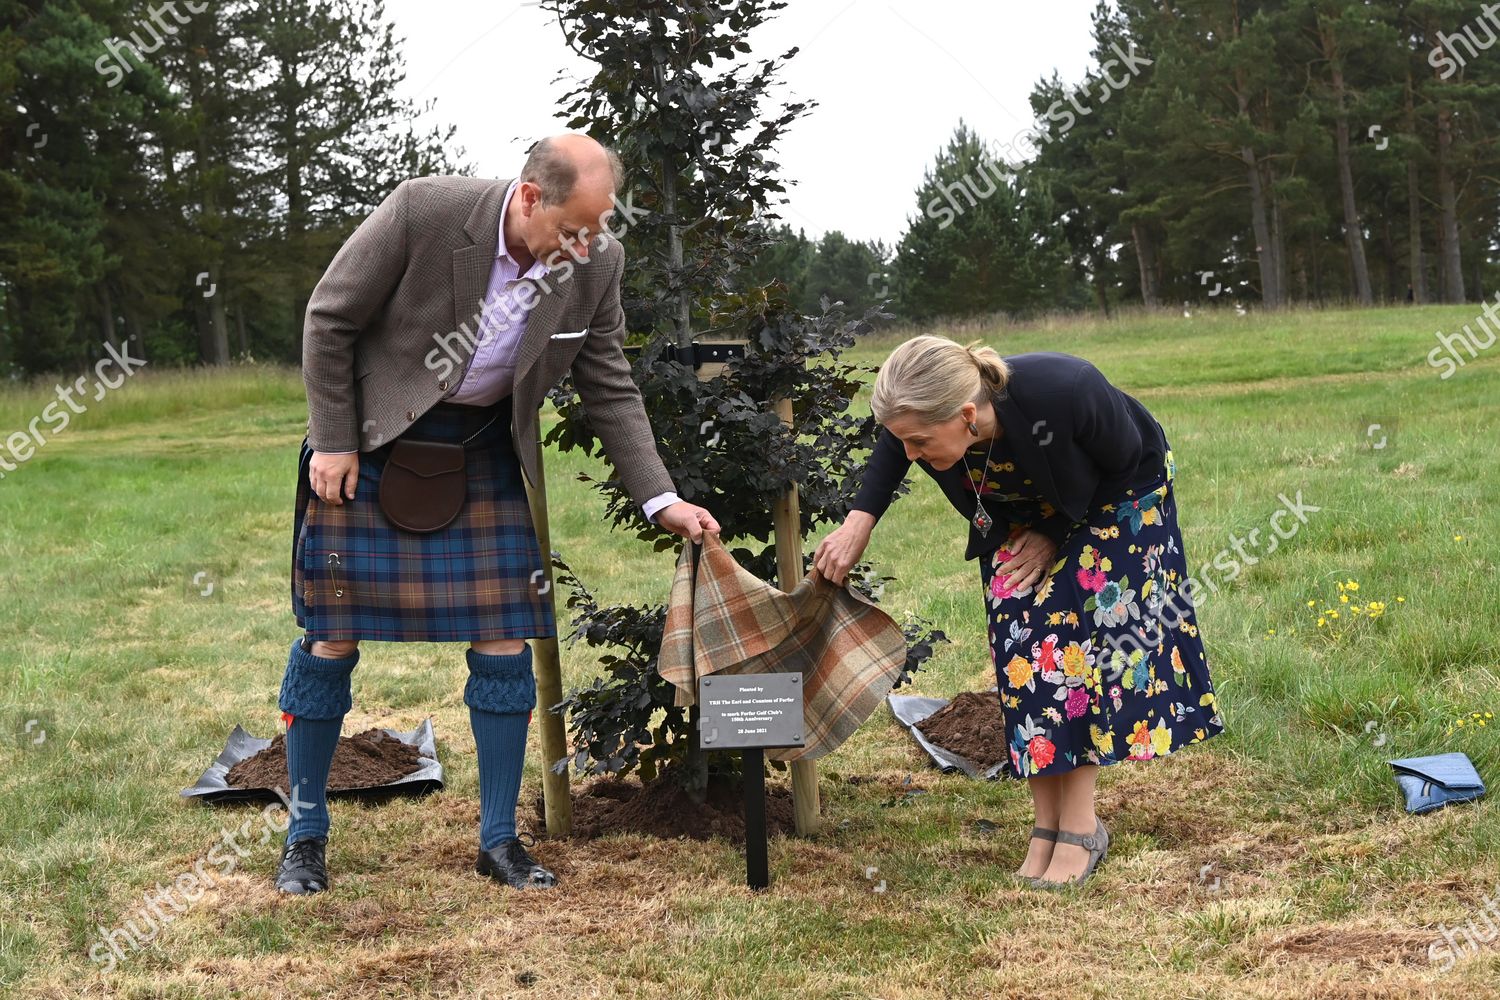 CASA REAL BRITÁNICA - Página 76 Prince-edward-and-sophie-countess-of-wessex-visit-to-forfar-golf-club-scotland-uk-shutterstock-editorial-12172307aw